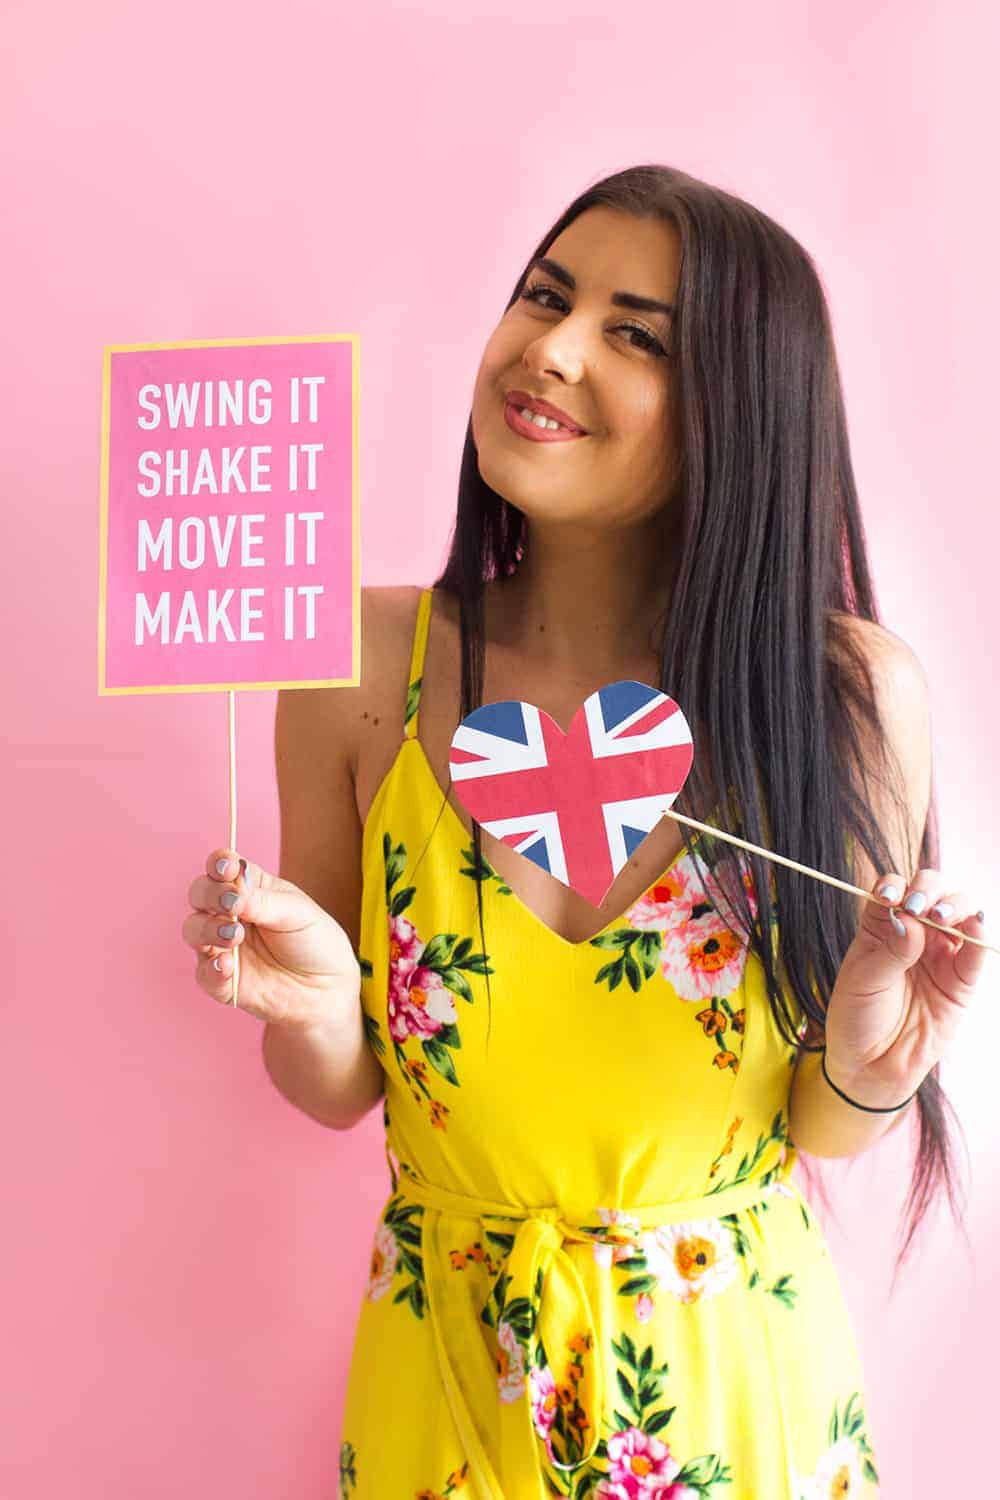 Print Download These Spice Girl Themed Props For The Ultimate 90s Themed Party Bespoke Bride